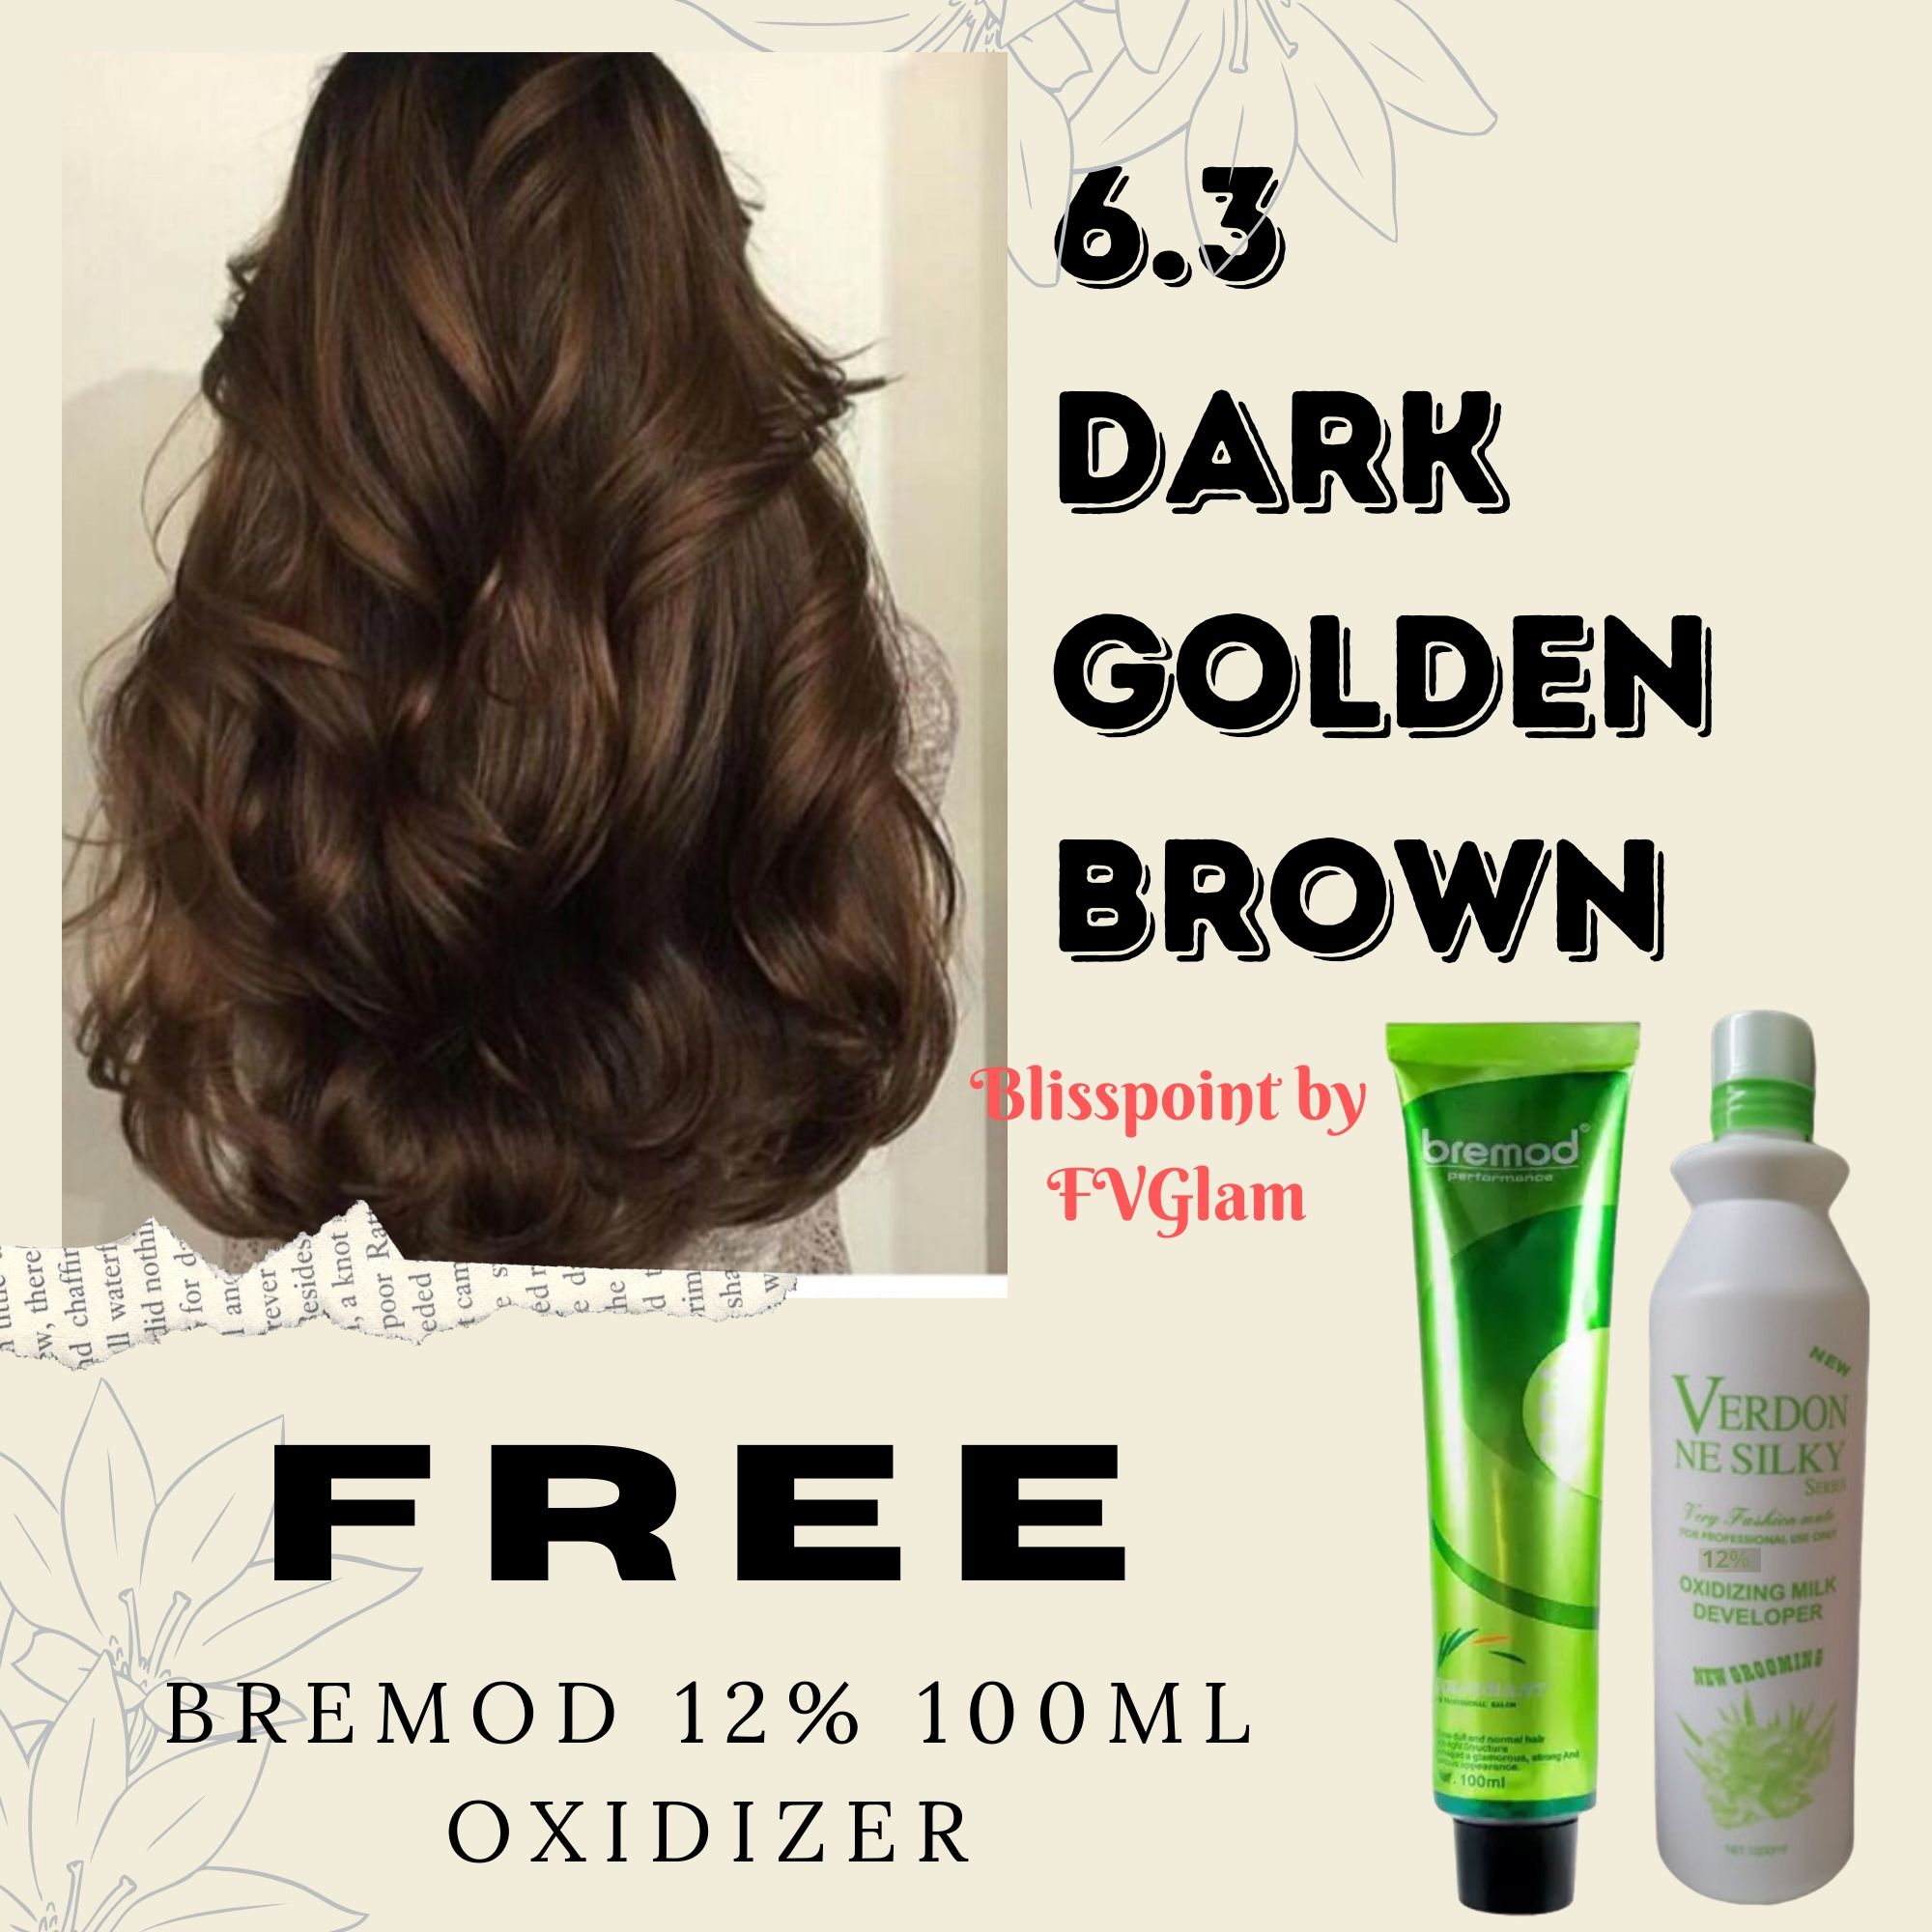 Bliss Point Bremod  + Verdon 12% 100ml Re-packed Oxidizer FREE - Dark  Golden Brown Bremod Performance Hair Color 100ML TUBE | Lazada PH